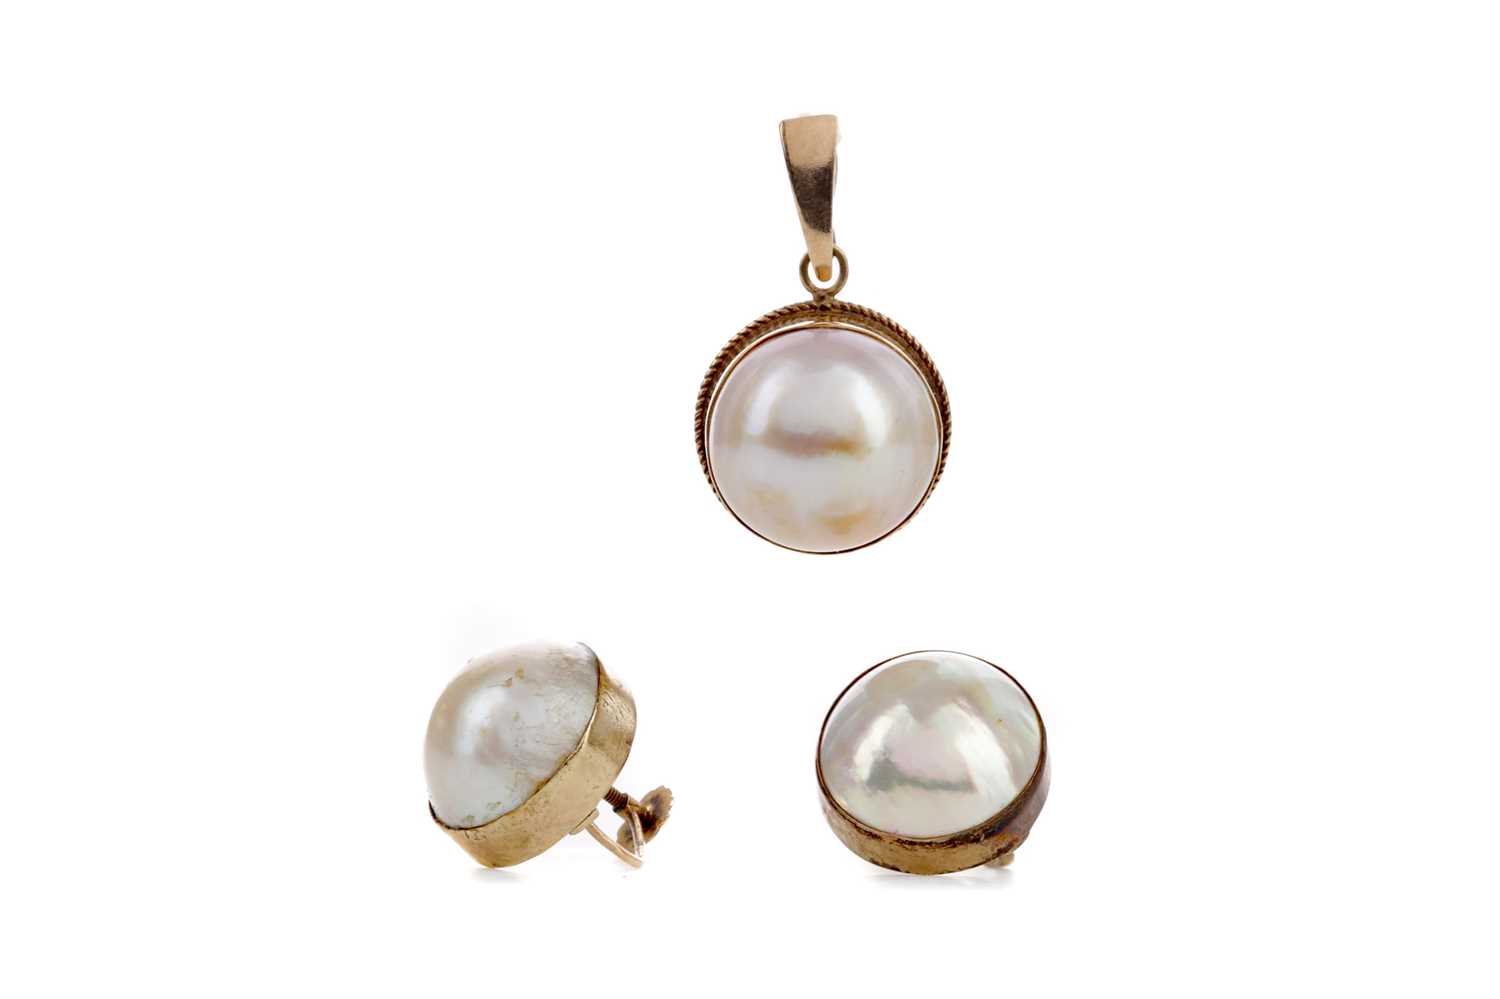 Lot 1338 - A BLISTER PEARL PENDANT AND EARRING SET